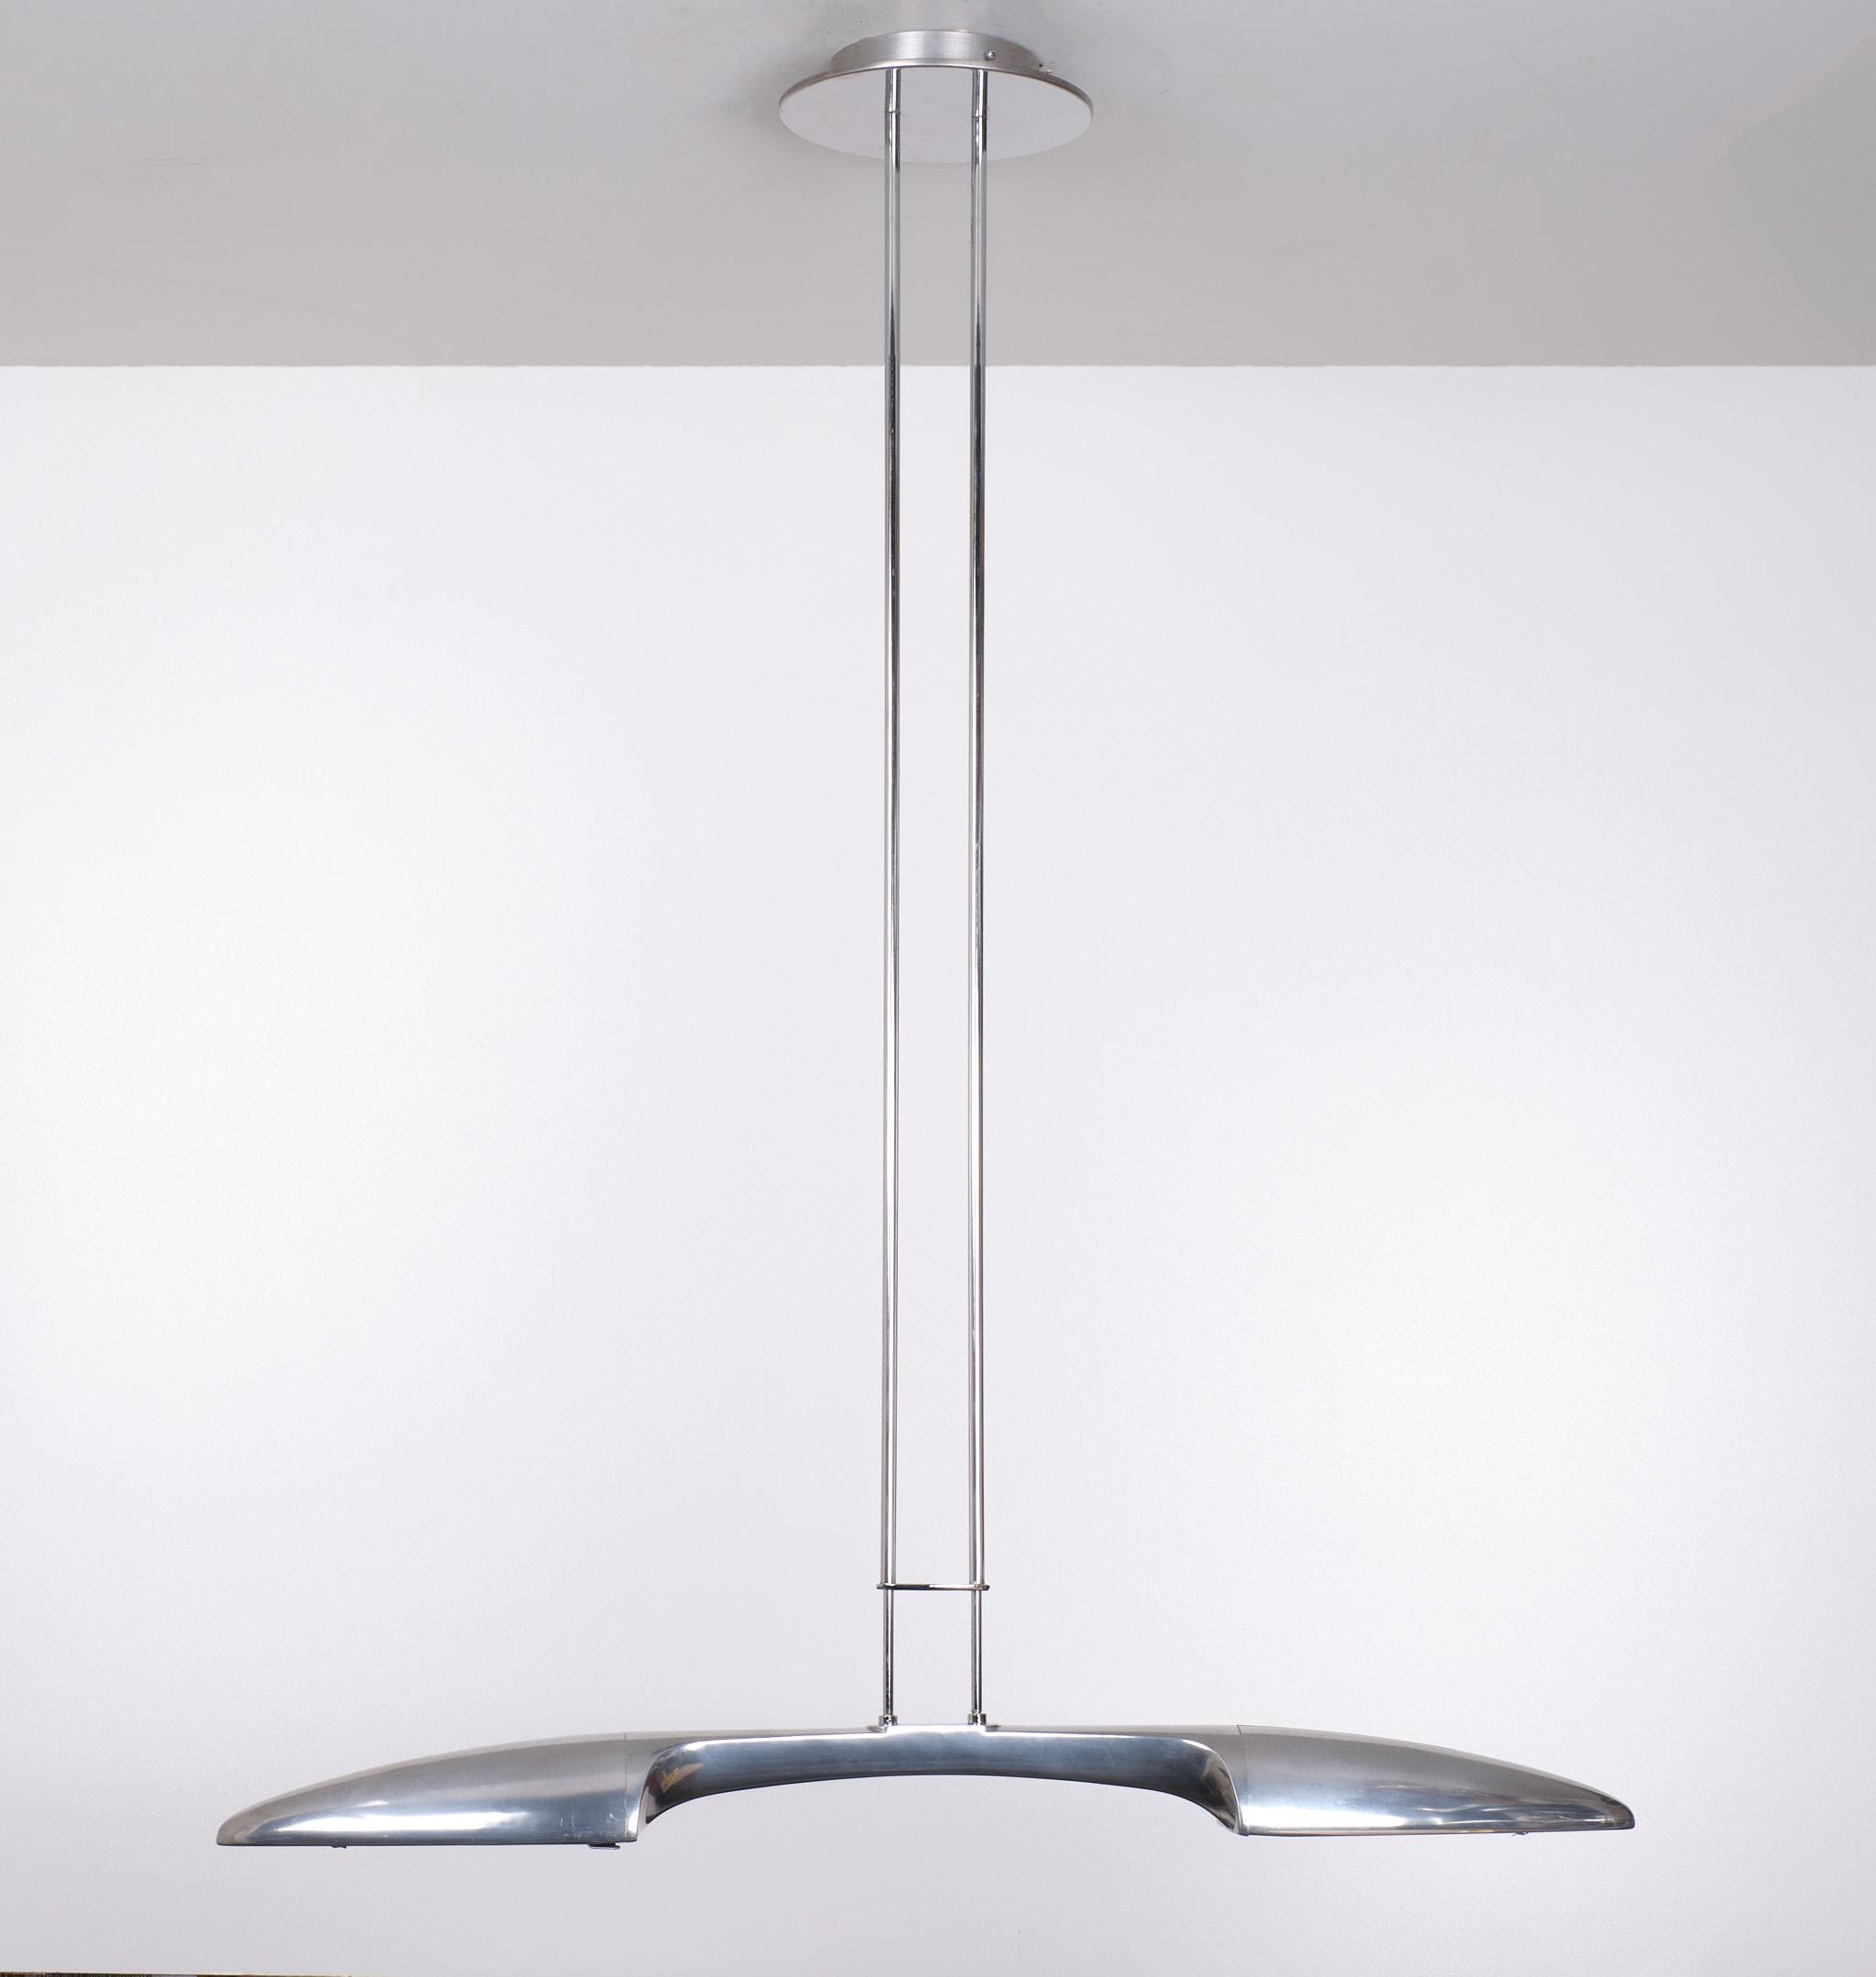 Hanging lamp Polished Aluminum design by Jorge Pensi for B-Lux Spain 1980.
model Olympia Billar. Halogen. Adjustable in height. New rewired. 
Special hanging lamp by the widely respected designer Jorge Pensi.


